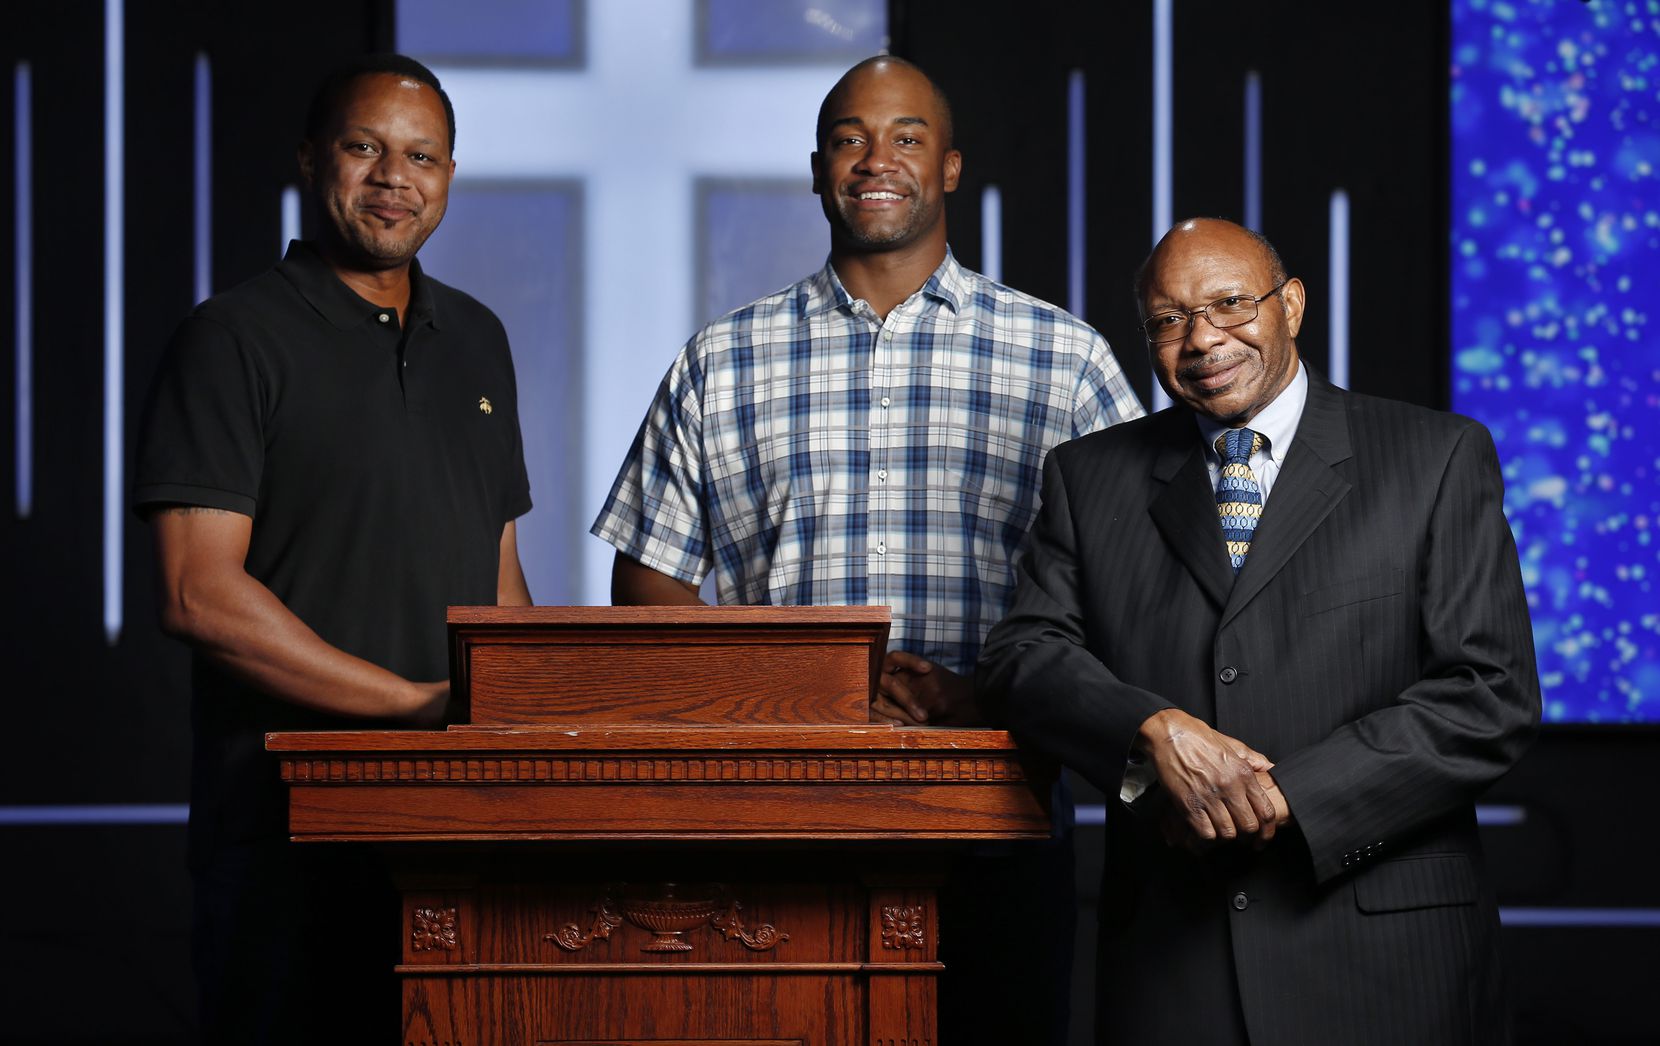 Pastor Chris Simmons (right) at the lectern with Donald Wesson (center), program director of the church's nonprofit arm, and Ernest Baylor, who oversees Bible lessons, at Cornerstone Baptist Church in Dallas.